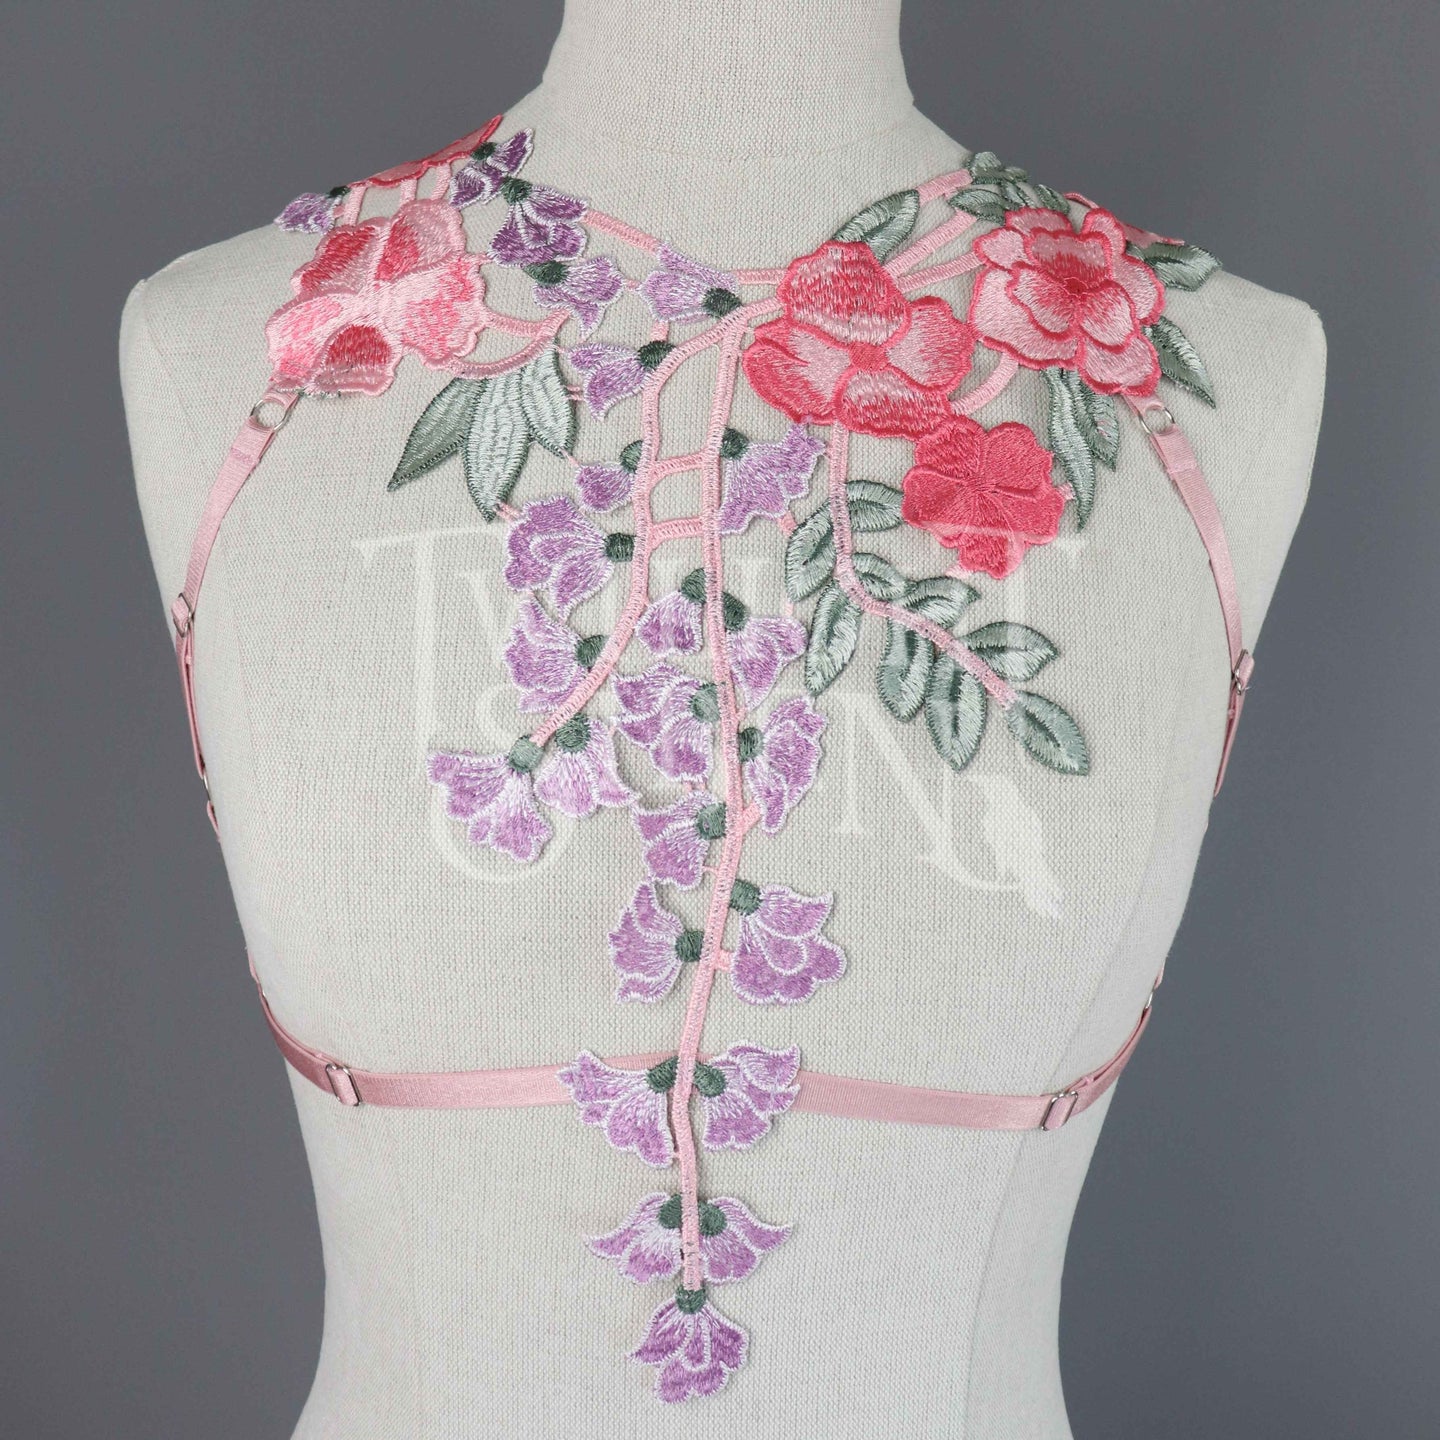 DUSKY ROSE PINK FLORAL LACE BODY HARNESS BRALET SIZE~ XSMALL // UK 4-6 // US 0-2 (FITS RIBCAGE 24